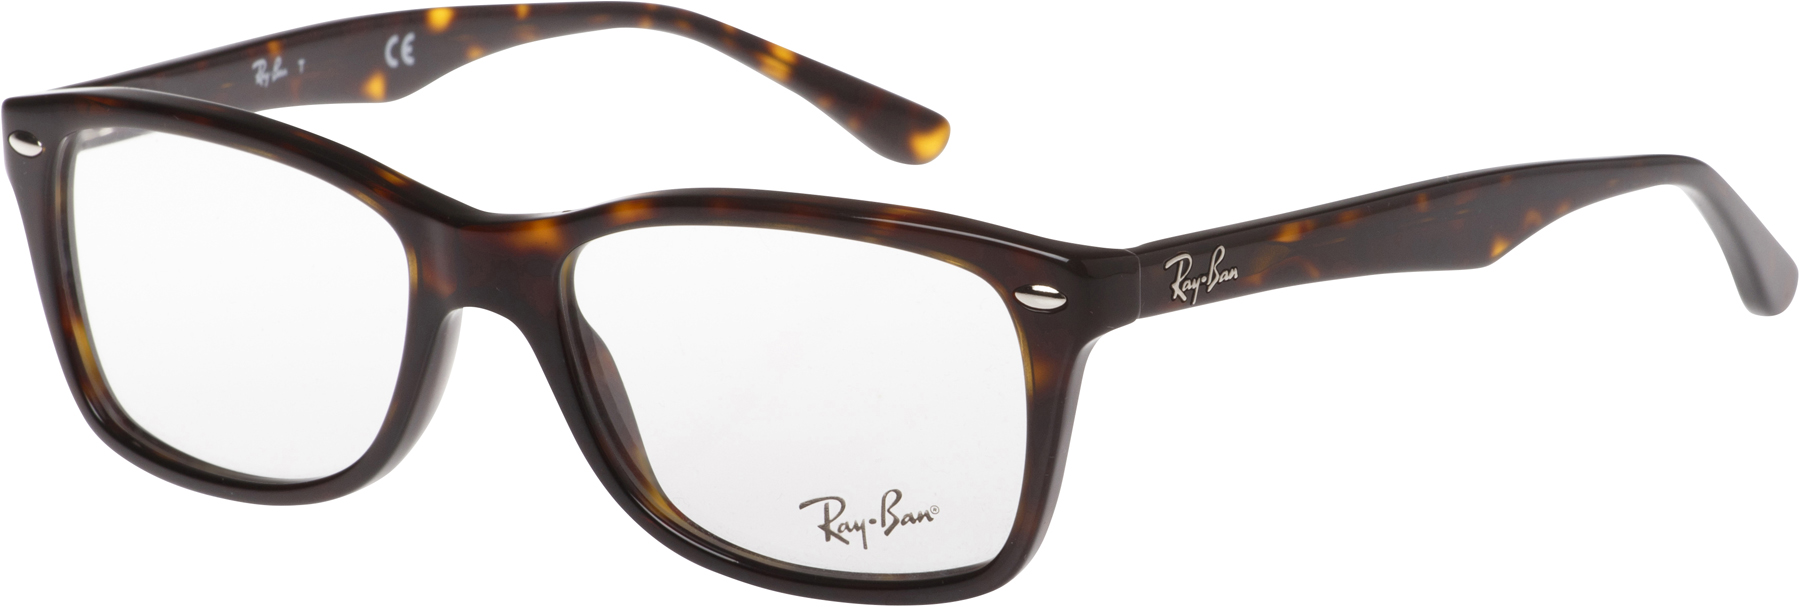 Ray-Ban 5228 image number null